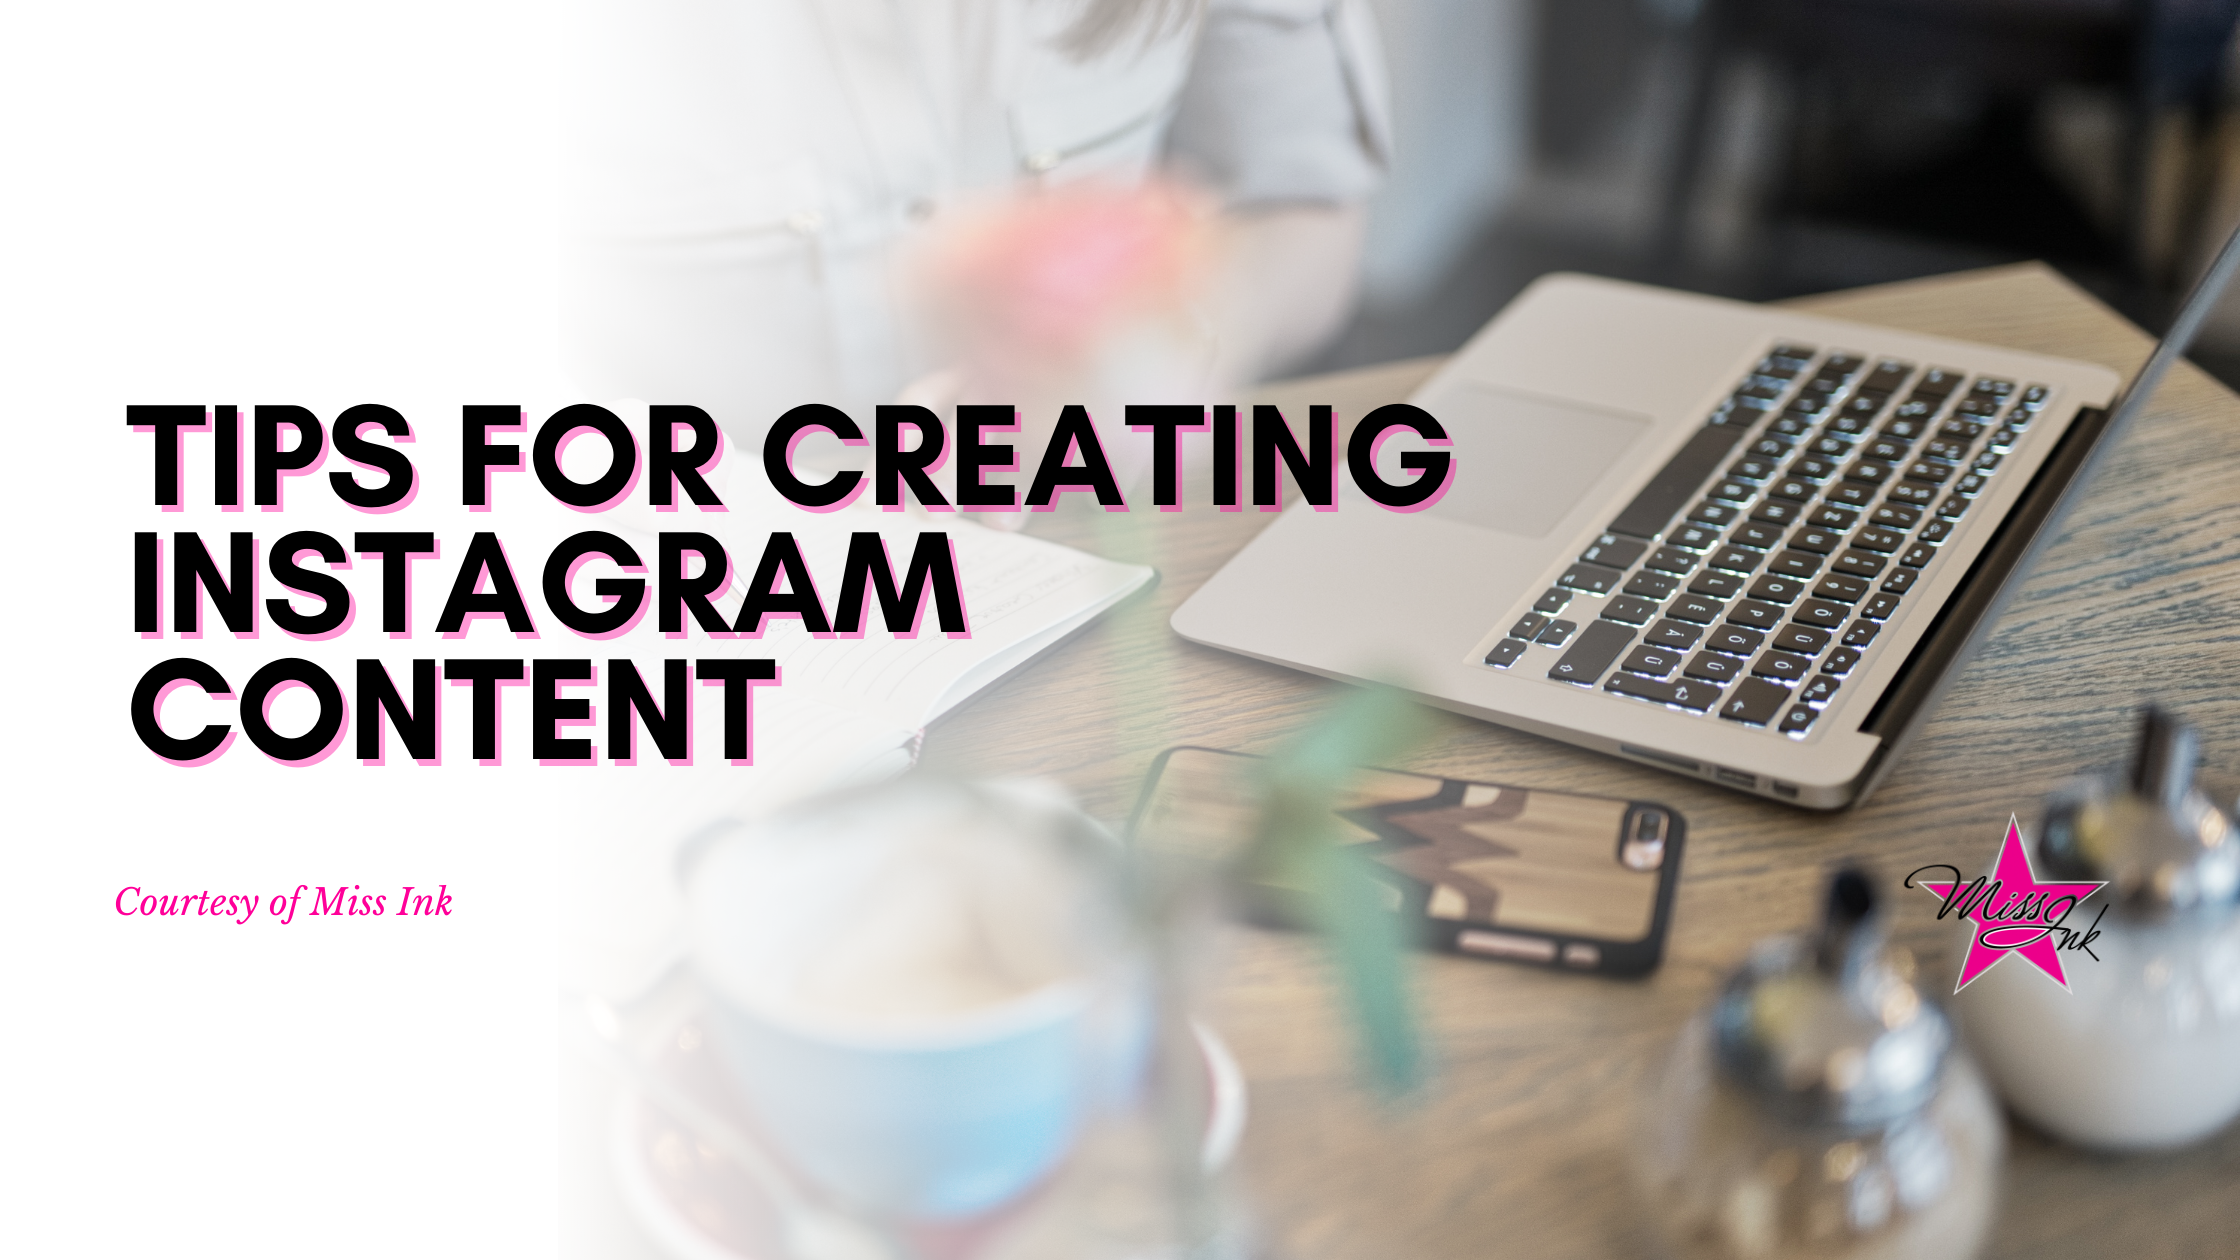 Tips for Creating Instagram Content